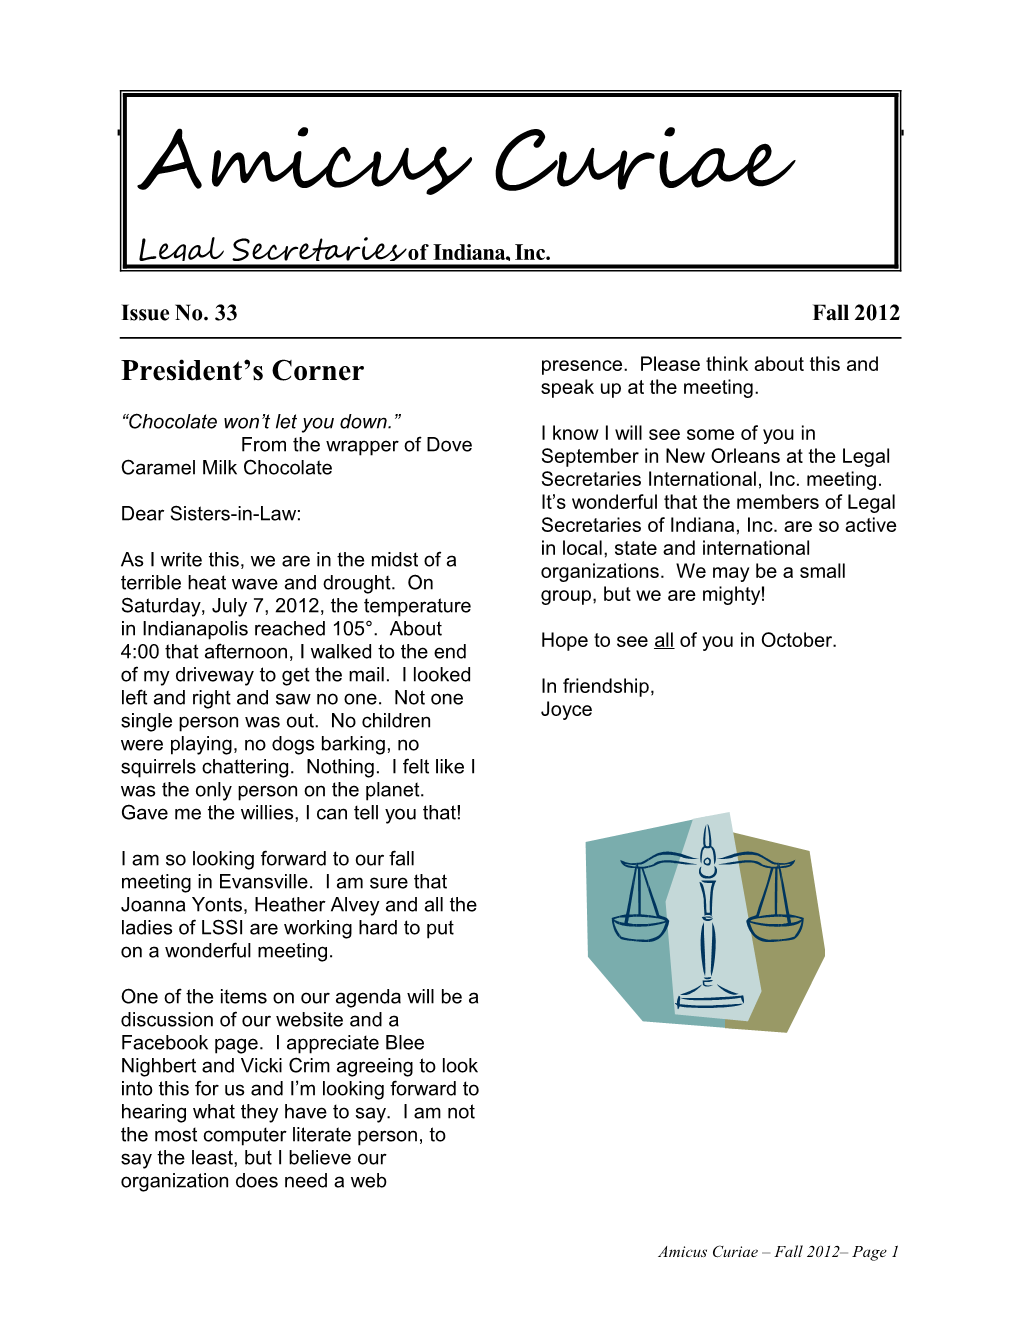 Amicus Curiae Fall 2012 Page 1